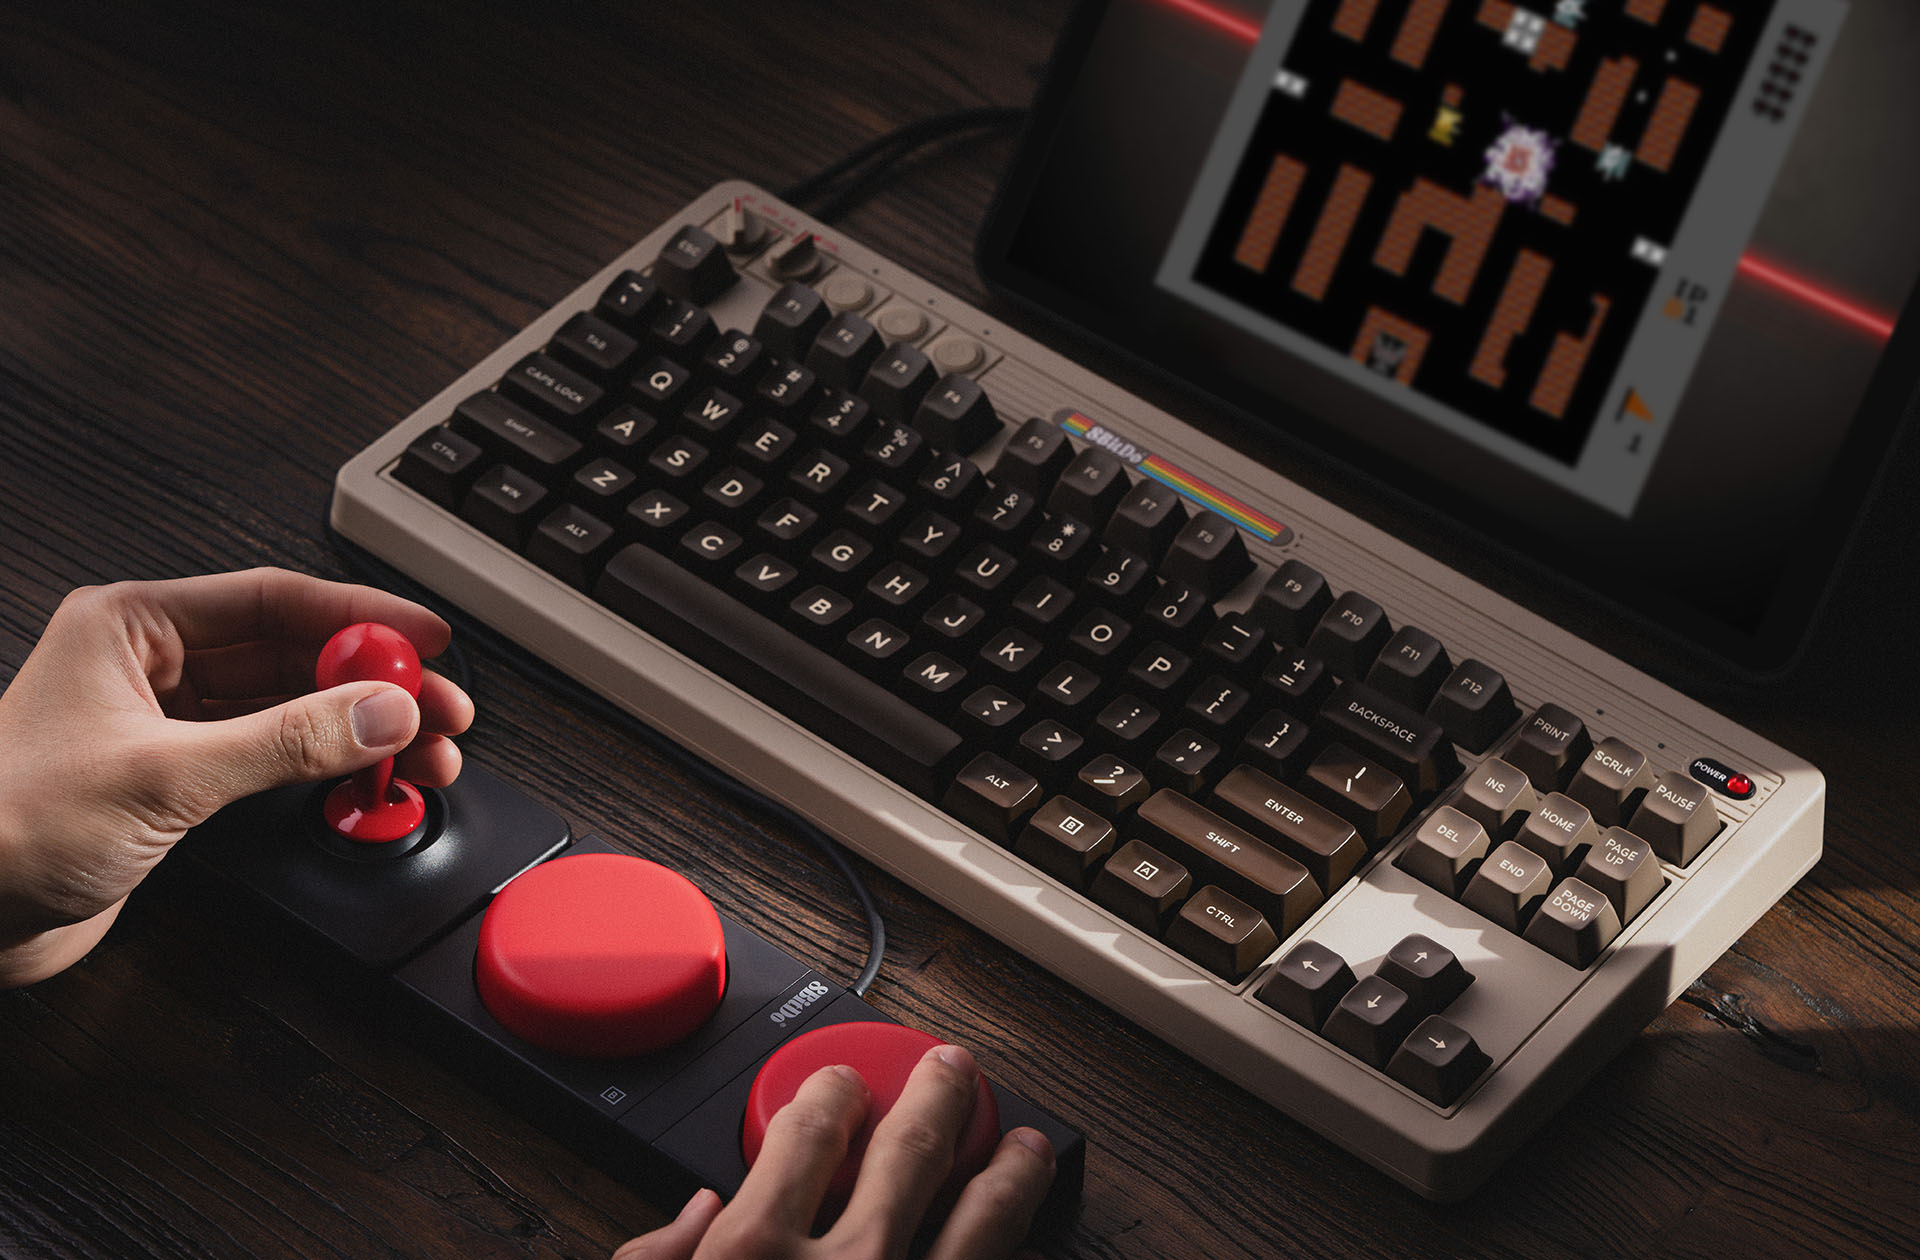 8BitDo Releases Retro Mechanical Keyboard C64 Edition with Modern Features and Joystick